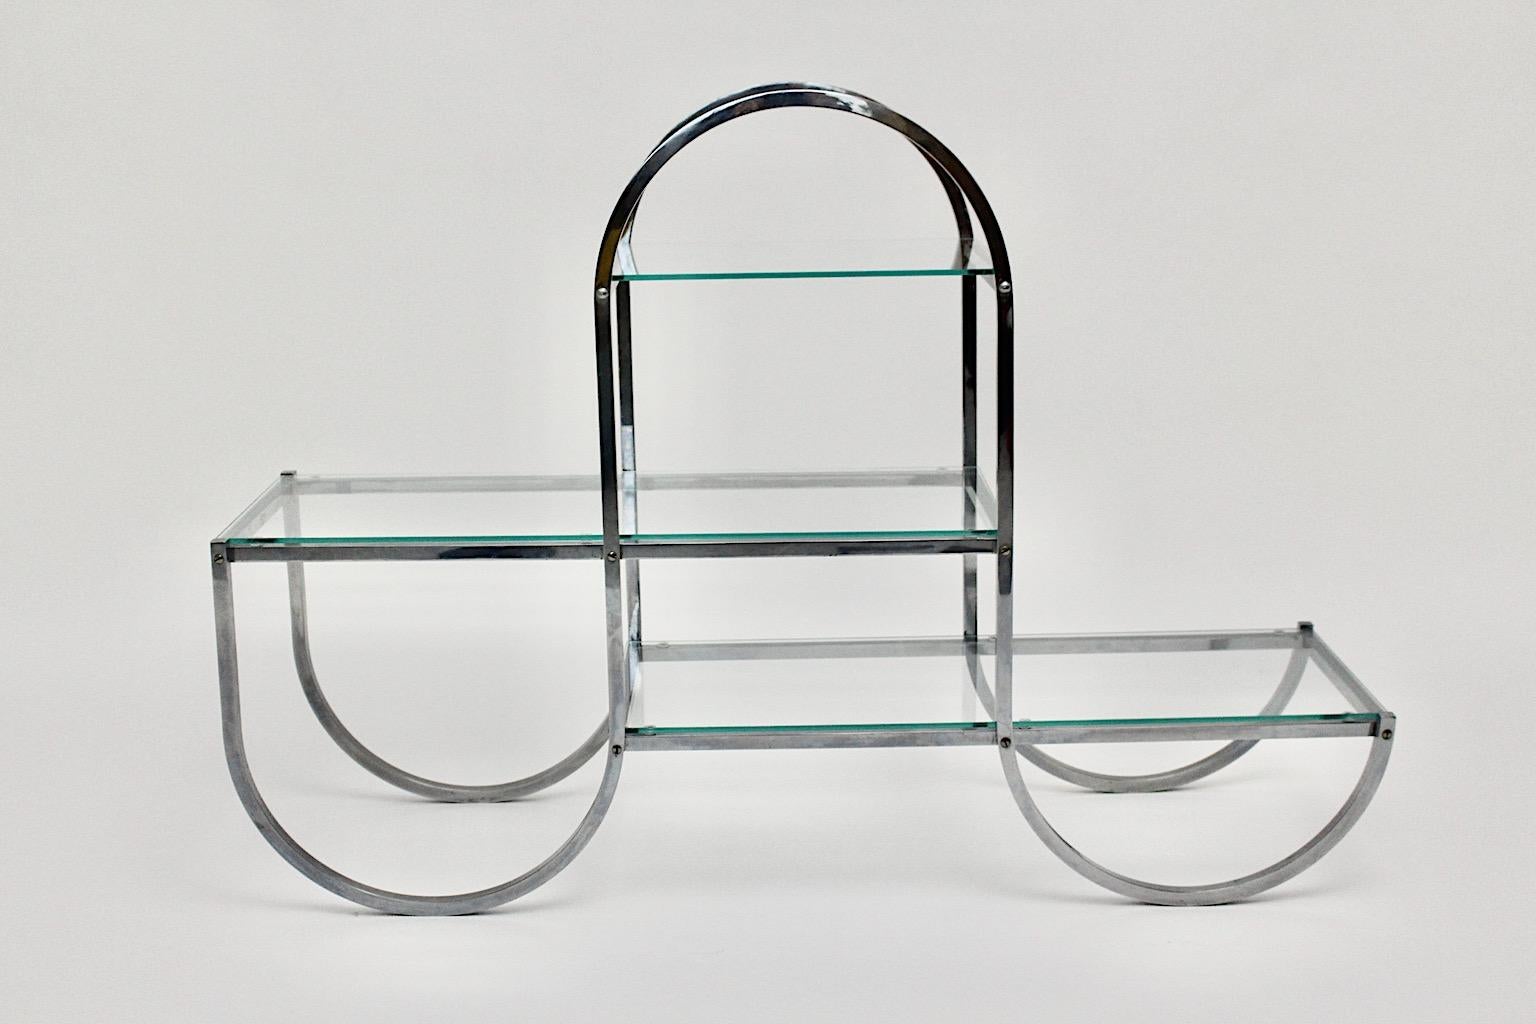 Art Deco Bauhaus vintage flower stand or book stand or room divider or shelves from chromed metal and clear glas plates, which was designed 1930s, Germany.
The flower stand shows a curved tube steel construction with three clear glass plates.
Art